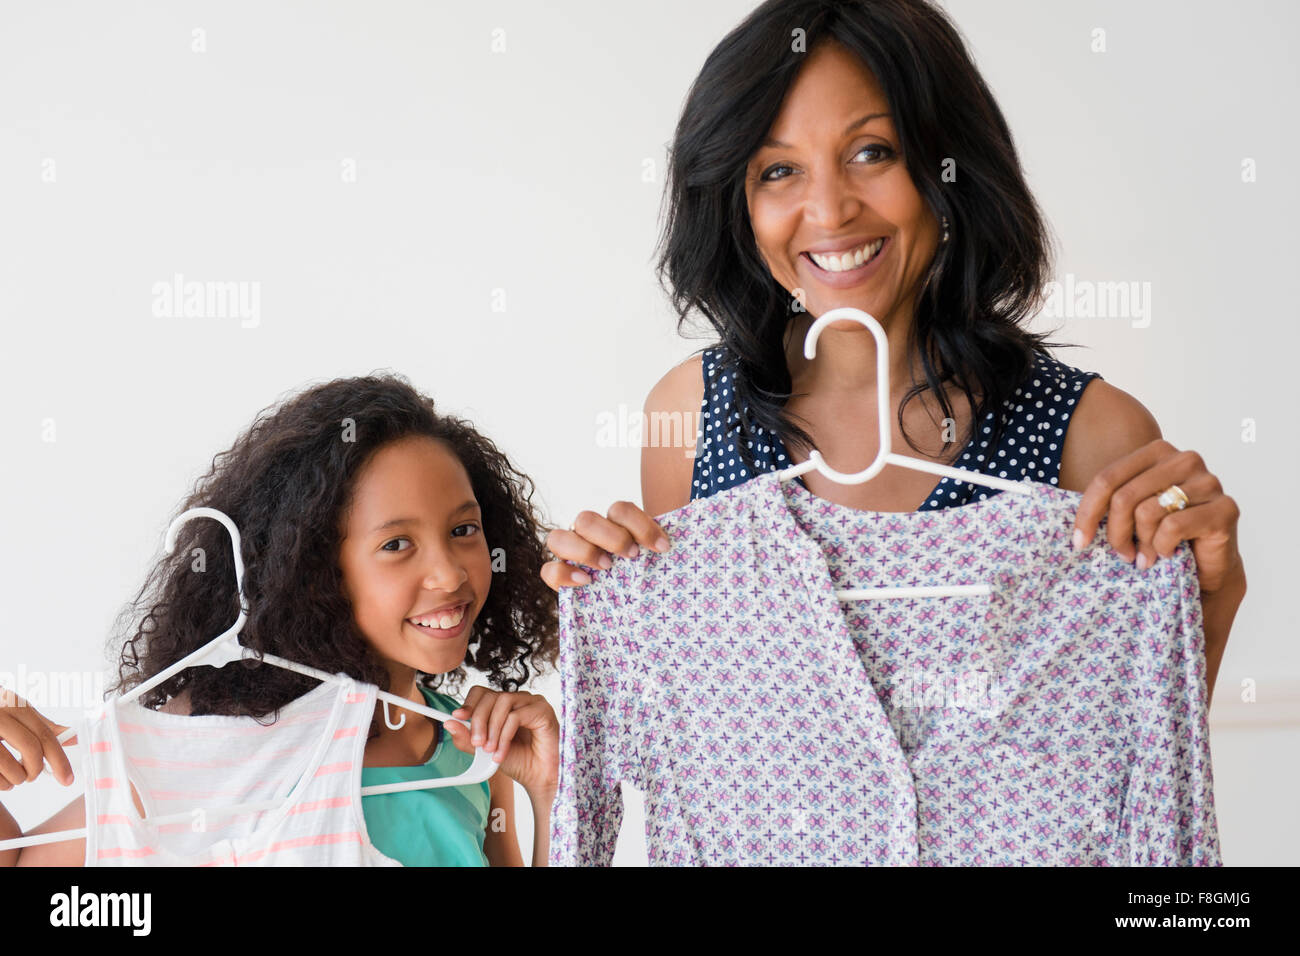 Mother and daughter displaying clothing Stock Photo